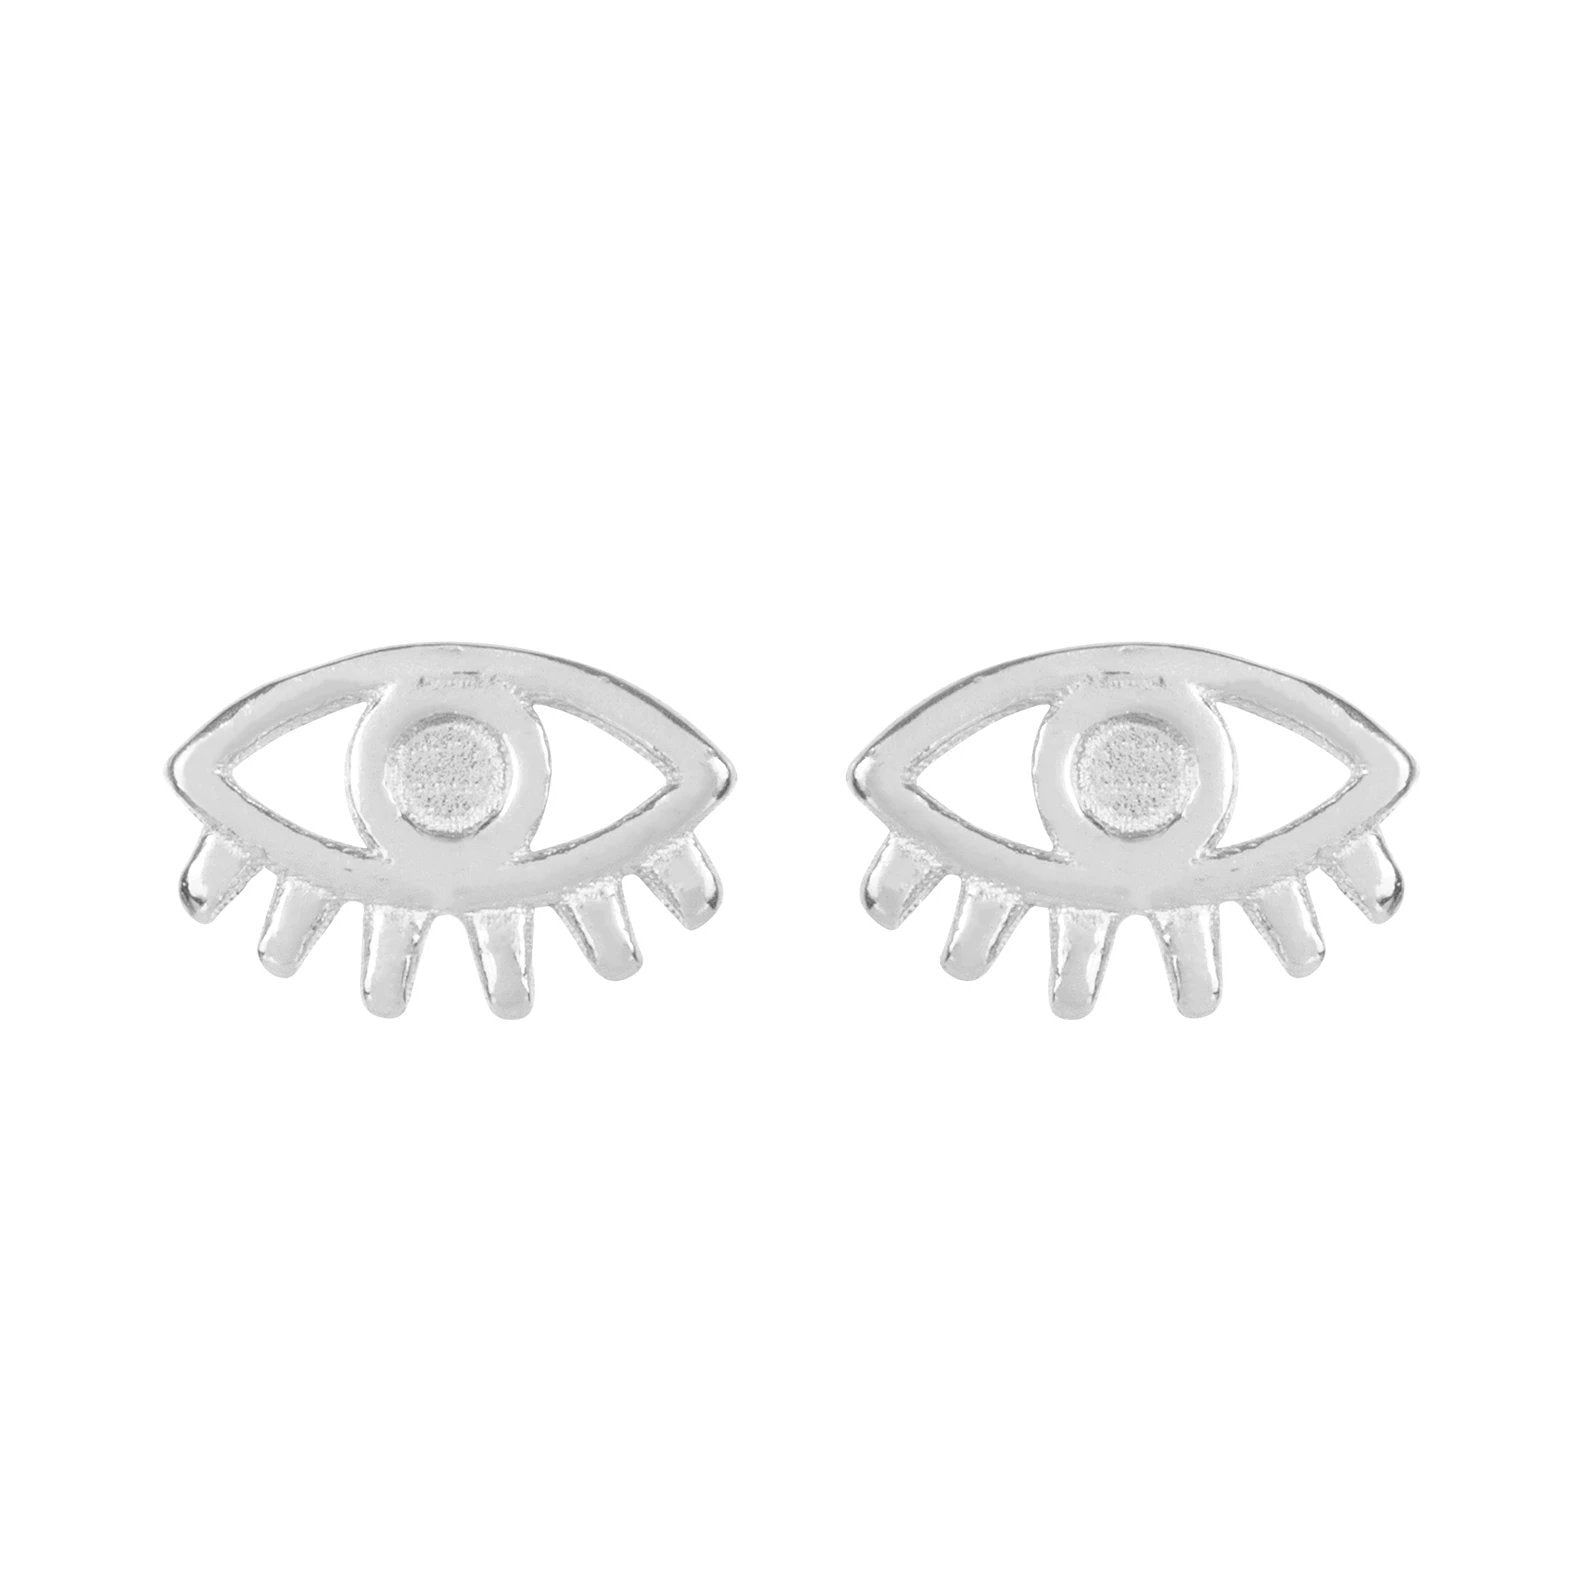 Good vibes. Lucky charm. Protector of evil spirits. No matter which way you put it, the Evil Eye Stud Earrings are a good omen and carries only well wishes along with it.  Made in California by Katie Dean Jewelry. Nickel free and hypoallergenic. 